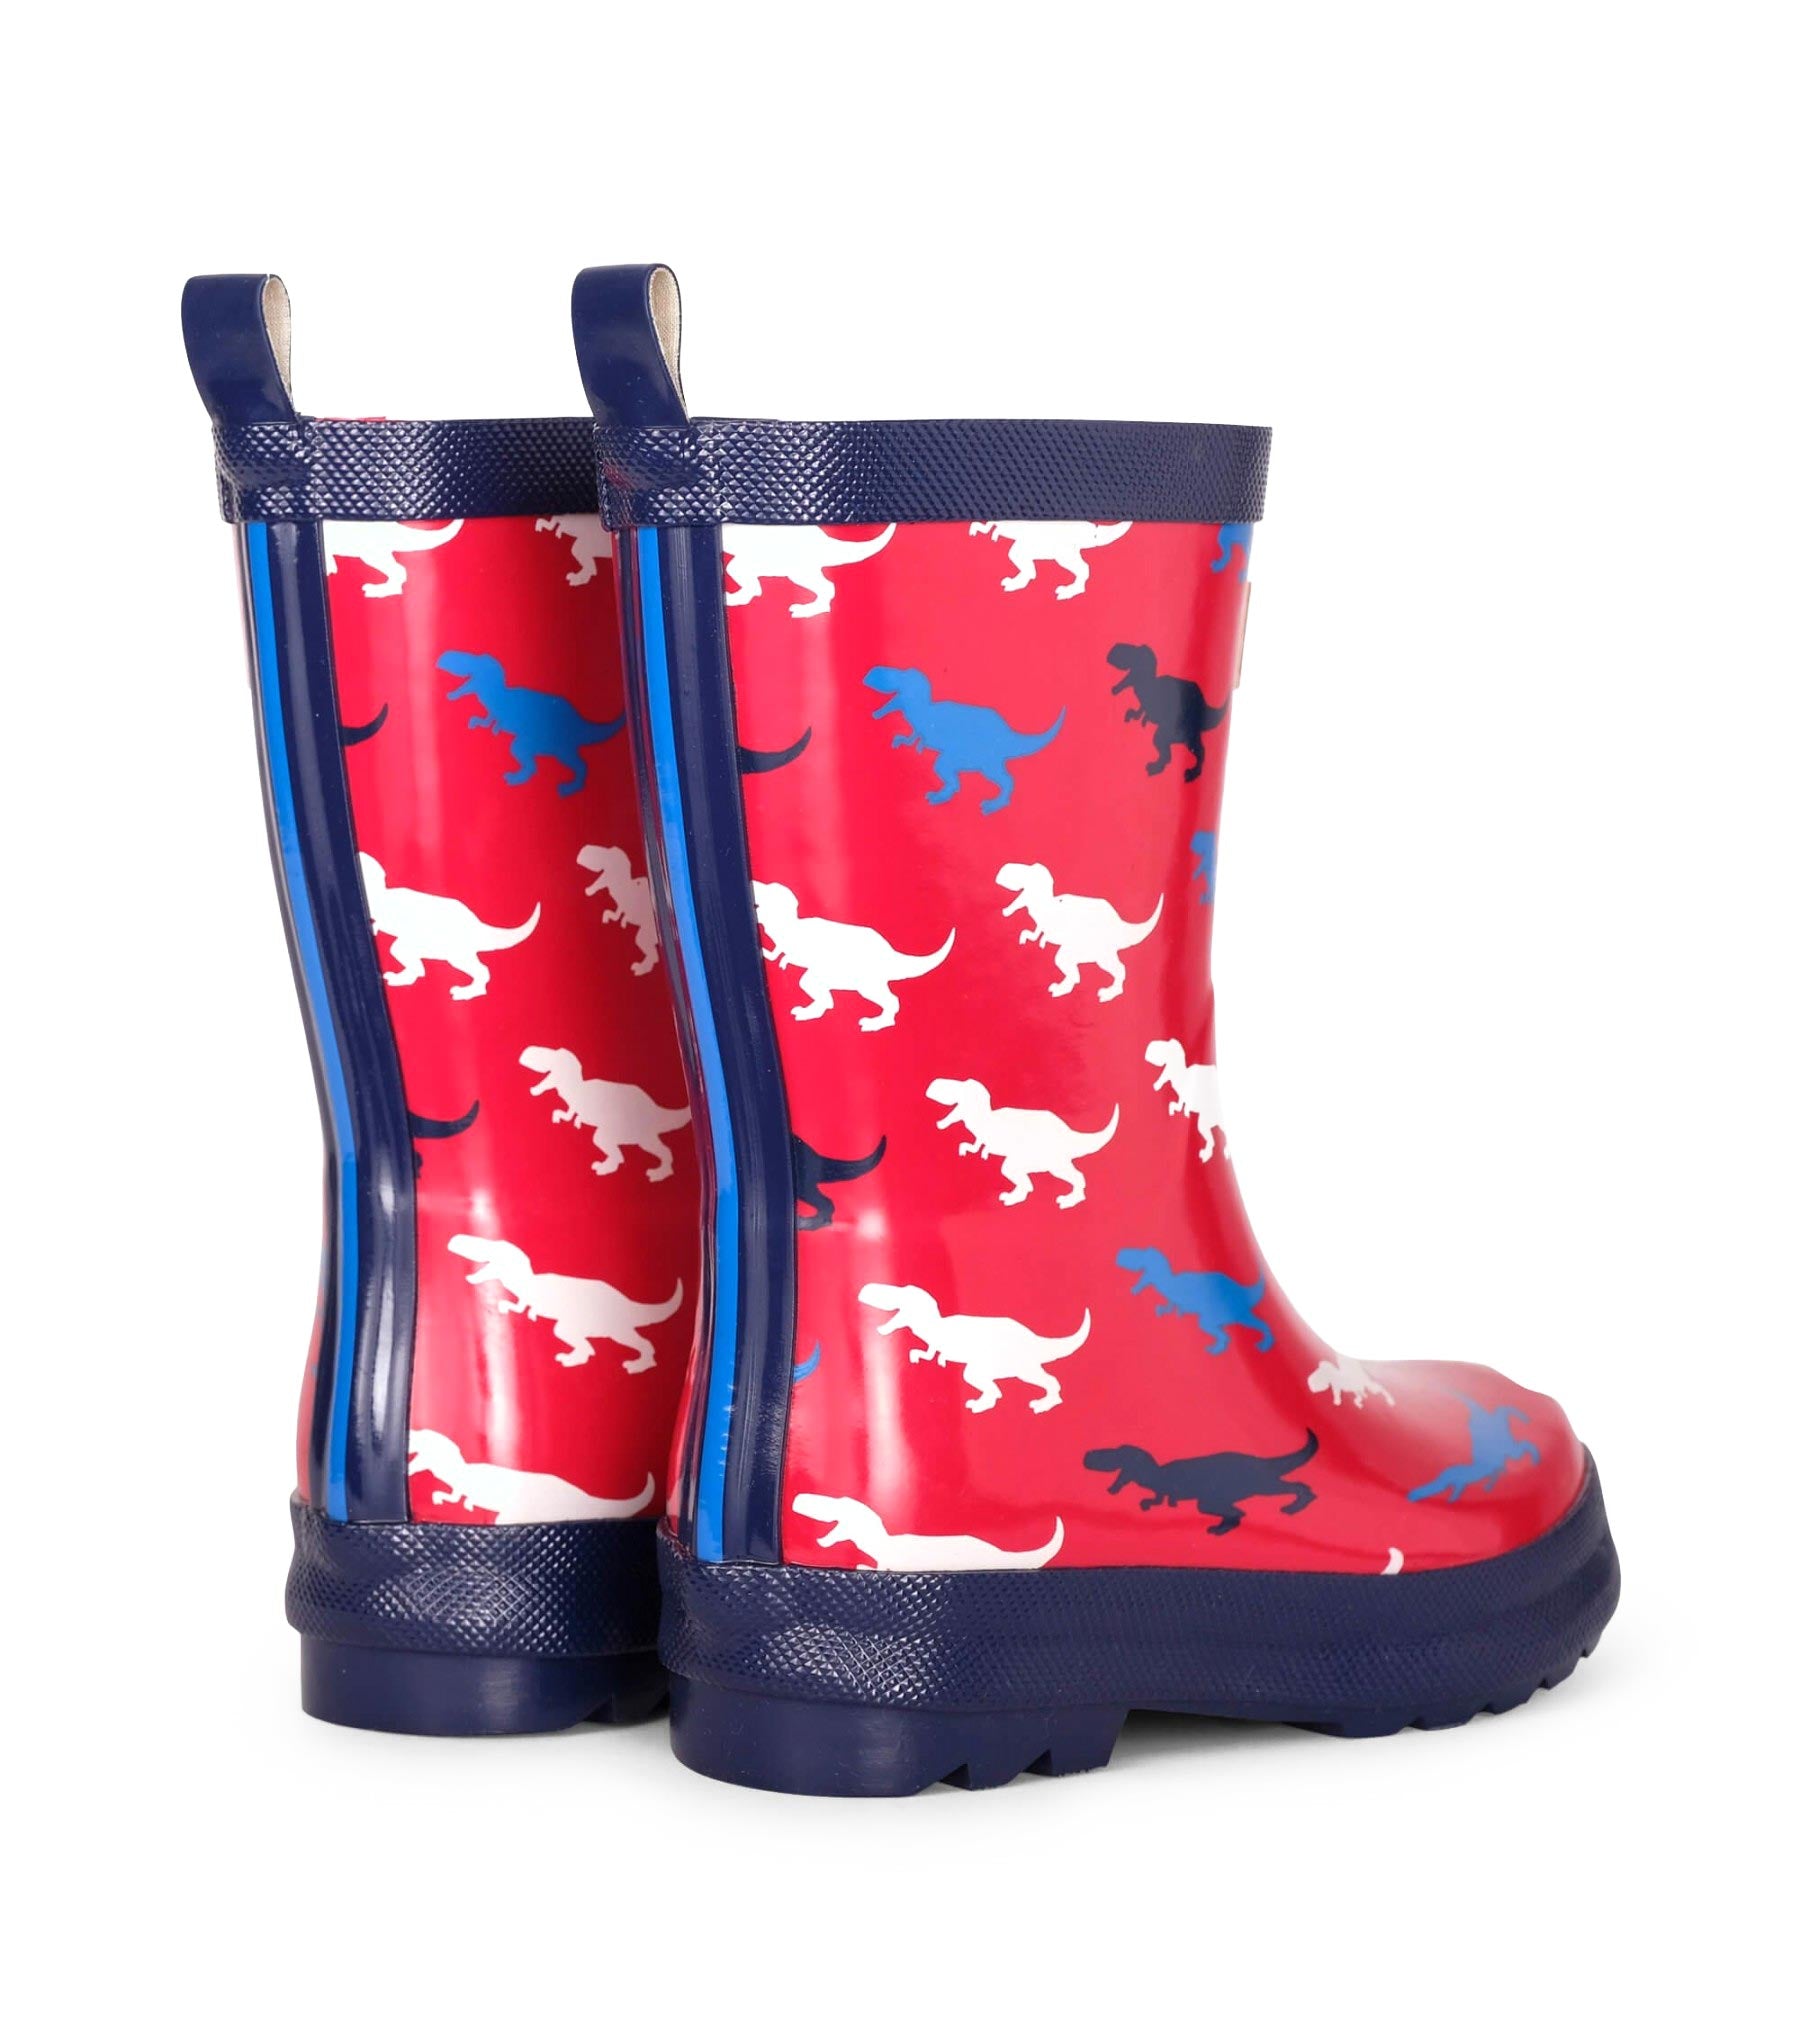 T-Rex Silhouettes Shiny Gumboots